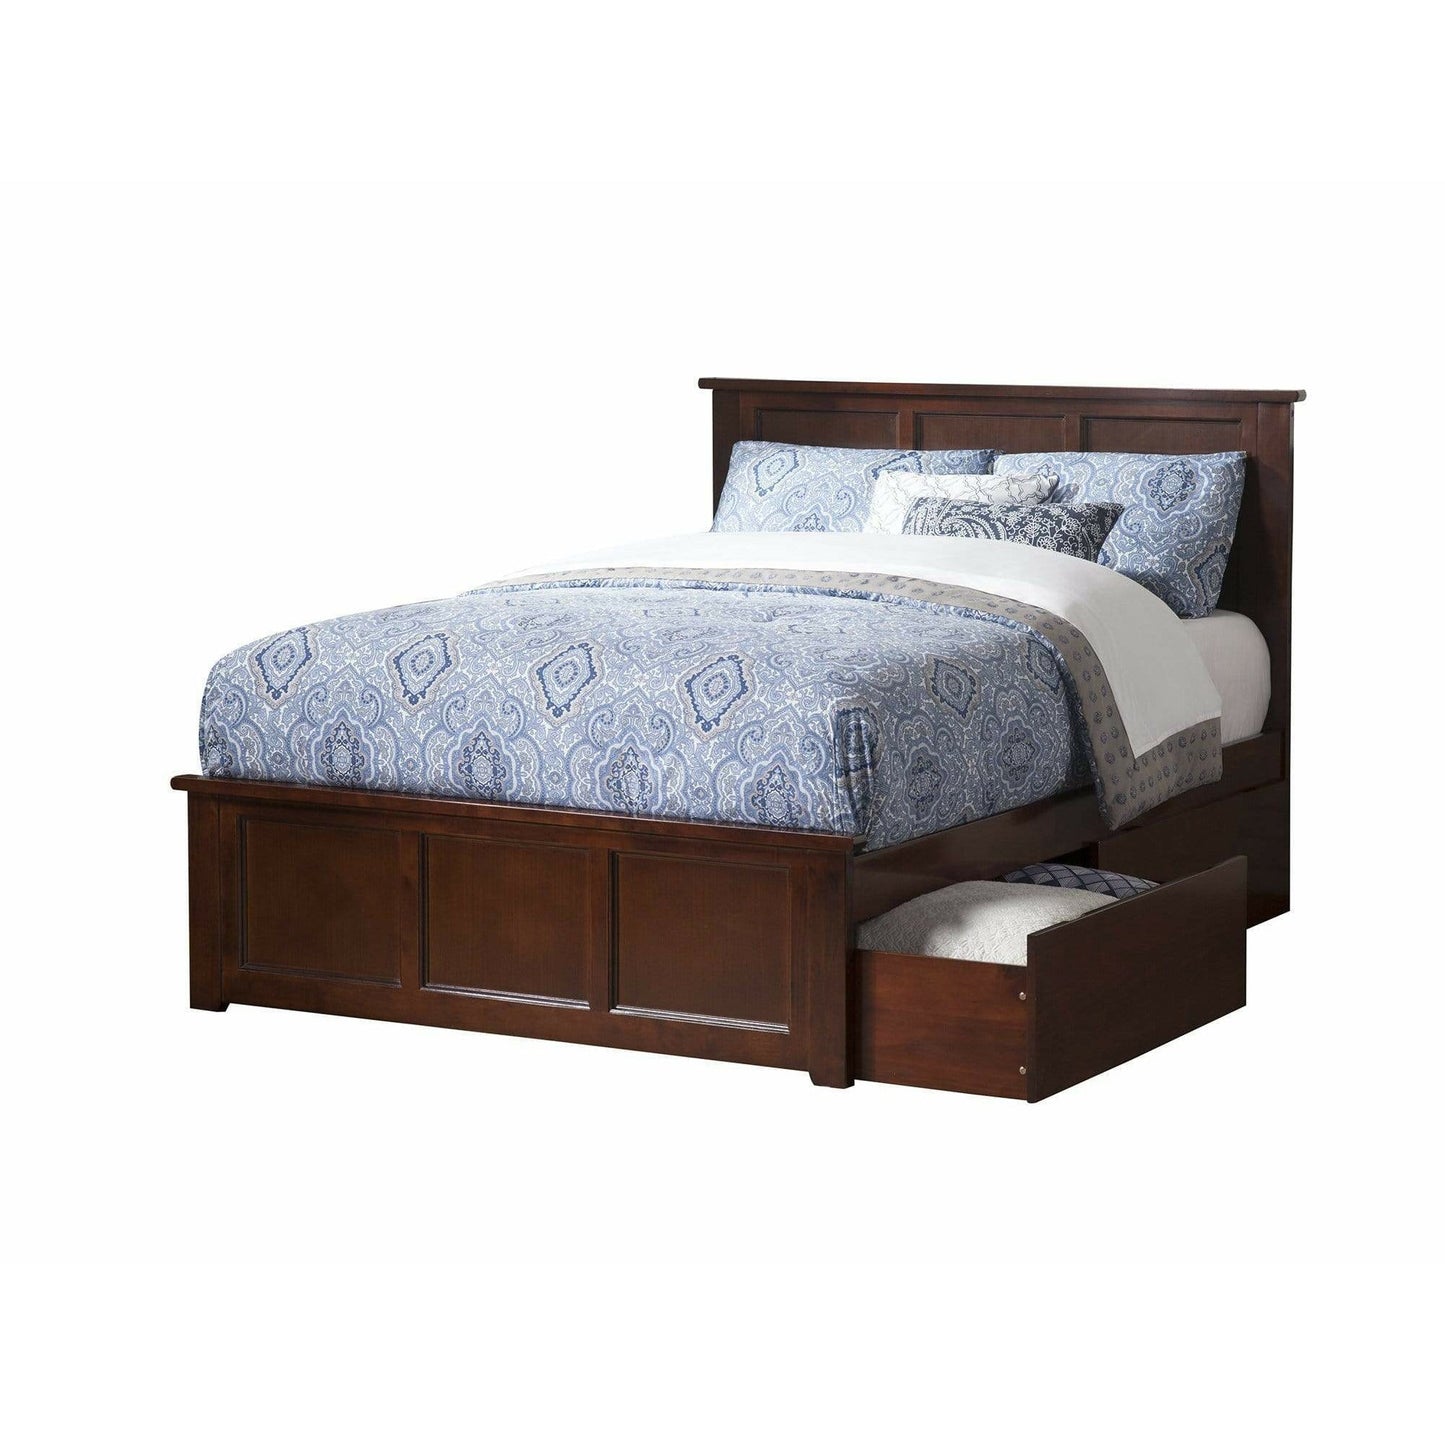 Atlantic Furniture Bed Walnut Madison Queen Platform Bed with Matching Foot Board with 2 Urban Bed Drawers in Espresso